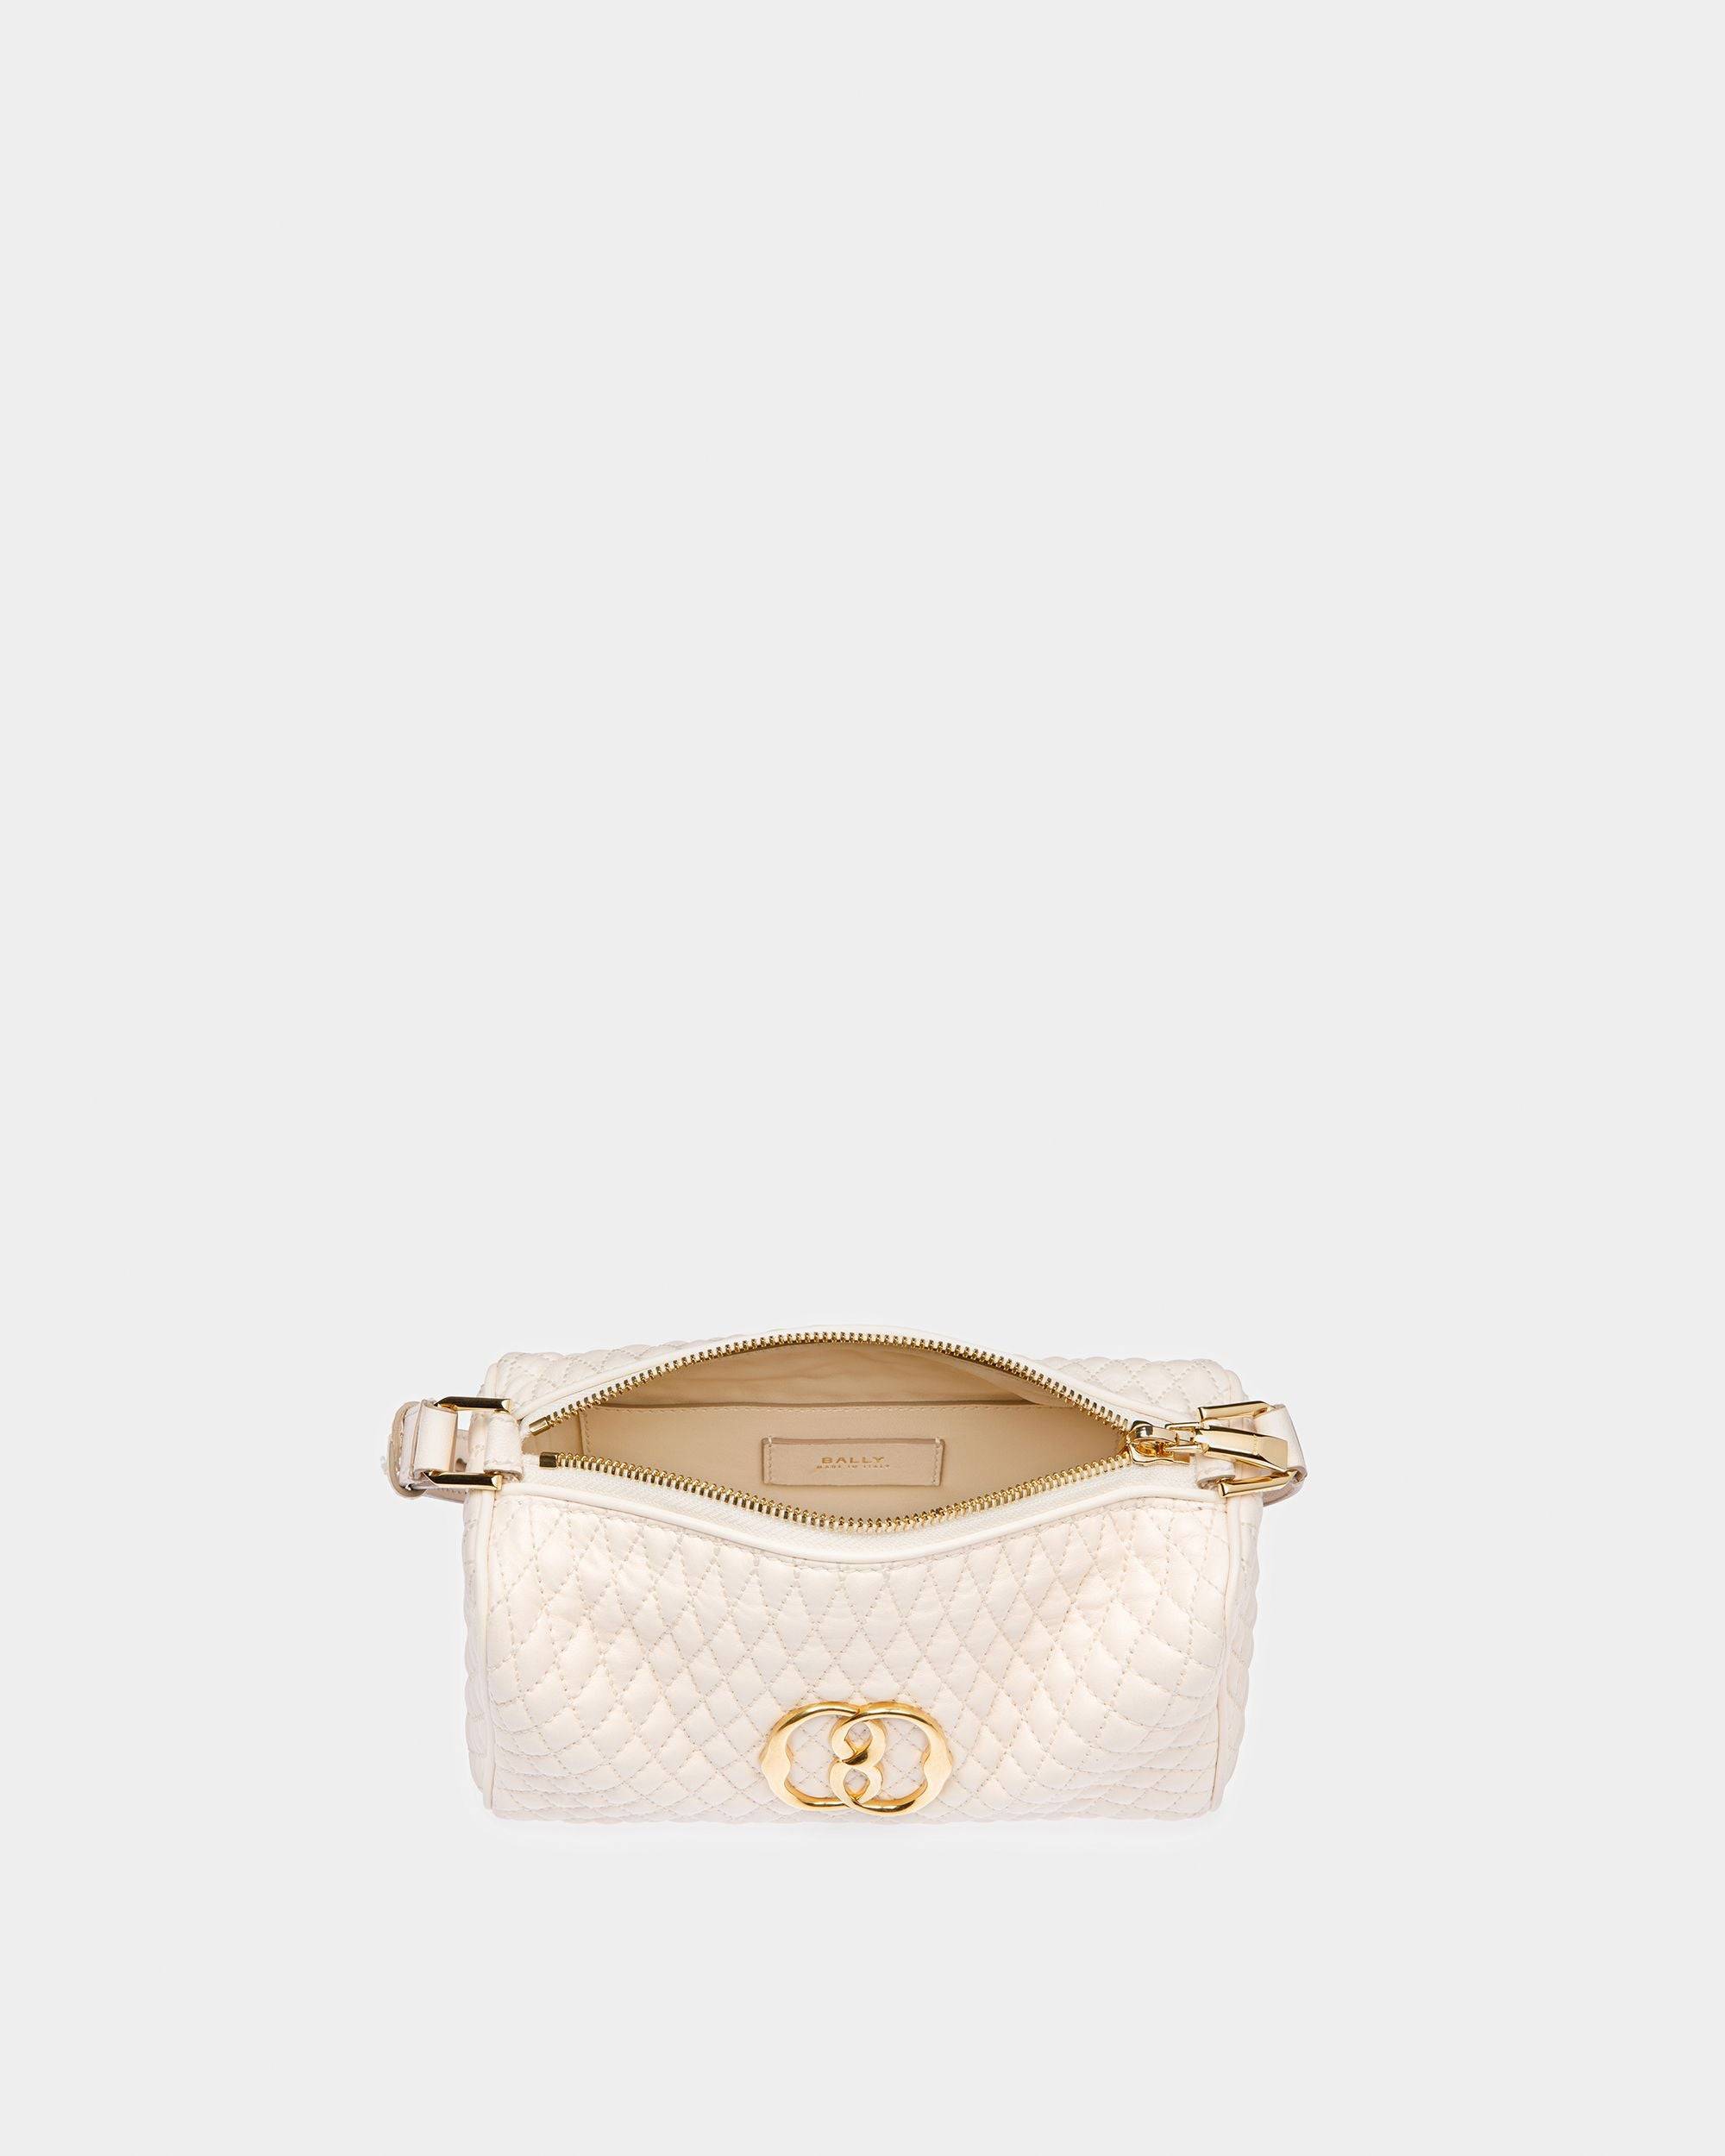 Emblem Minibag In Quilted Leather - Bally - 05